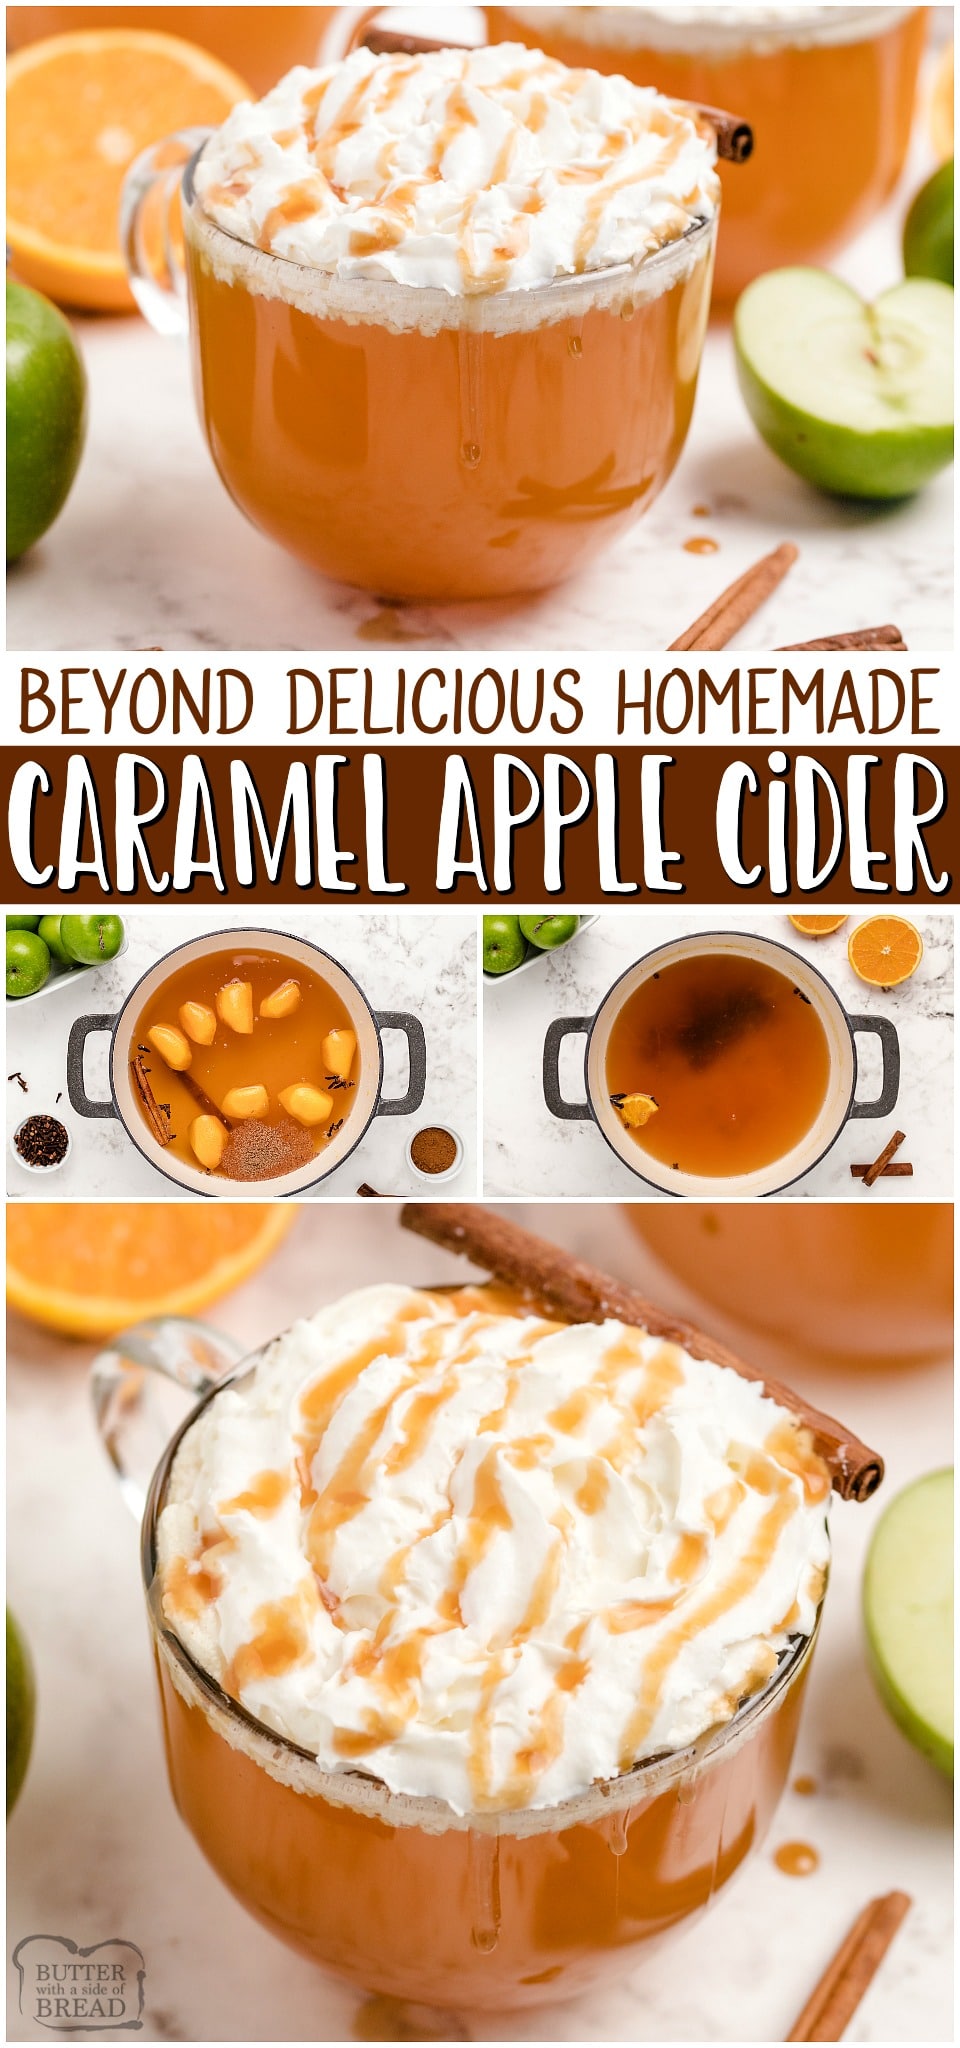 Caramel Apple Cider recipe made with apple juice, cinnamon, cloves & nutmeg! Spiced Apple Cider topped with fresh cream and a drizzle of caramel for a hot & delicious Fall treat! #apples #applecider #beverage #hotdrink #Fall #cider #caramel #easyrecipe from BUTTER WITH A SIDE OF BREAD